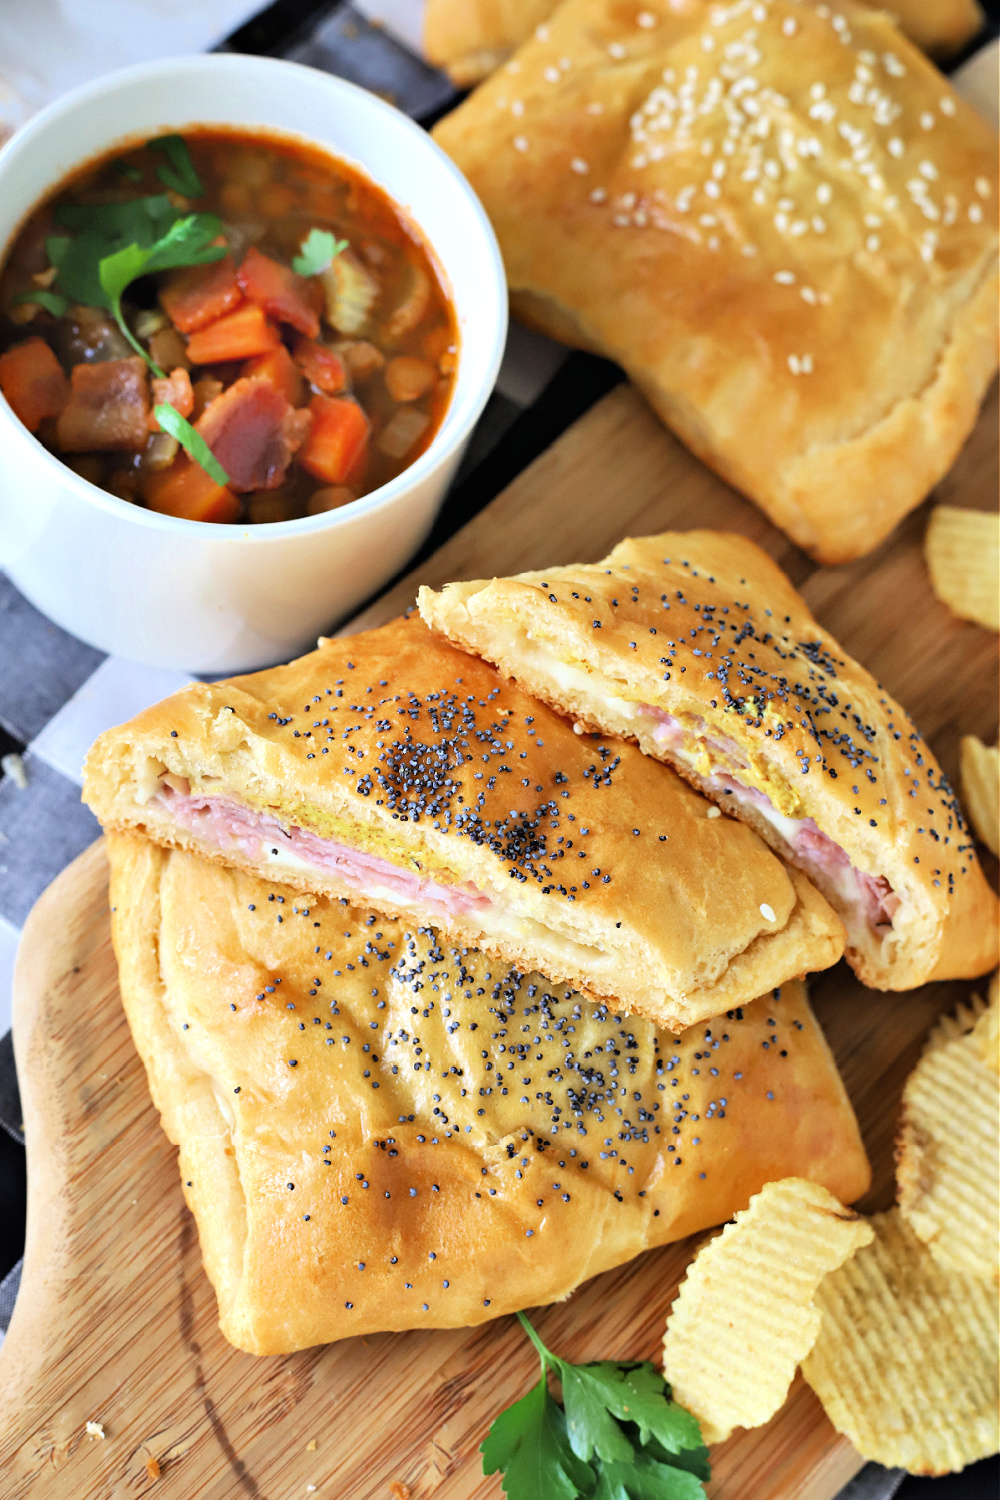 Ham & cheese hand pies, a quick and easy hot sandwich. Fill crescent roll dough with Swiss, cheddar or American cheese and bake!